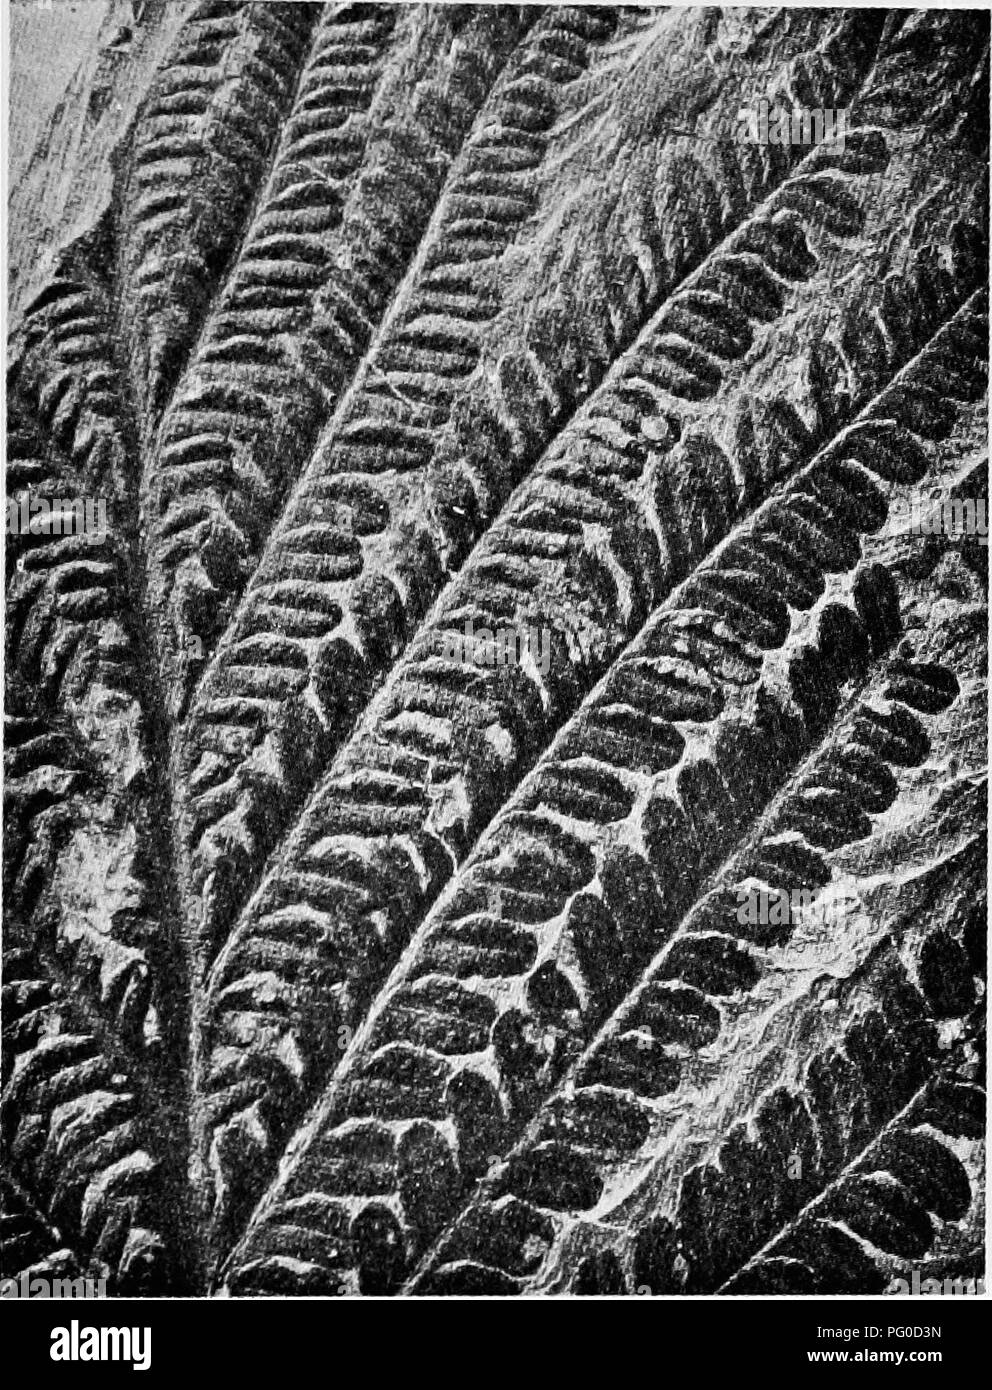 . Fossil plants : for students of botany and geology . Paleobotany. XXVIl] CALLIPTERIS 559 This polymorphic species (fig. 367) is one of the most characteristic Permian plants. The oval-linear pinnules, attached by the whole base, occur on both pinnae and rachis; this feature, the thick texture of the lamina, and the linear, obliquely set, pinnae render the fronds easily recognisable. The fronds bore seeds.. Fig. 367. Callipteris conferta. From the Permian of Aschbach, Bhenish Prussia (British Museum, No. 39052). In a recent account of some Permian plants from Germany, Schuster' refers a porti Stock Photo